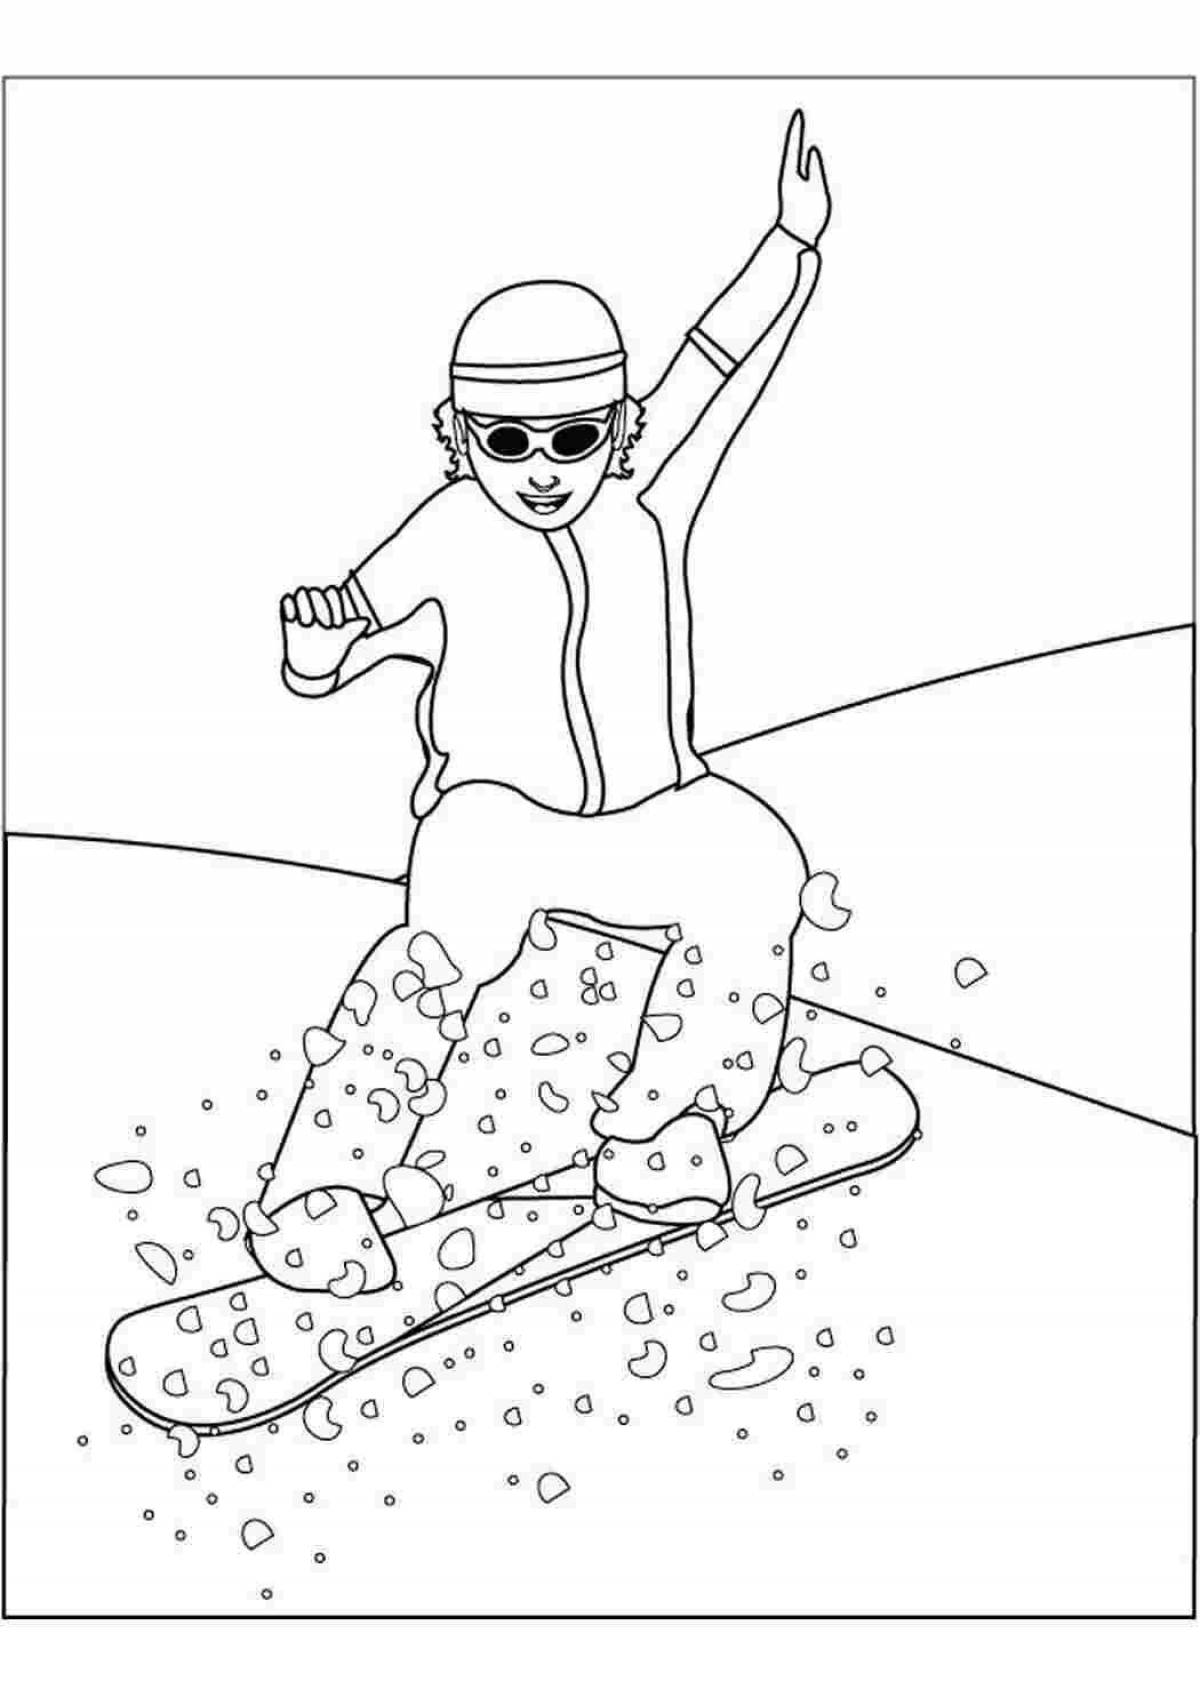 Glitter winter sports coloring book for 4-5 year olds